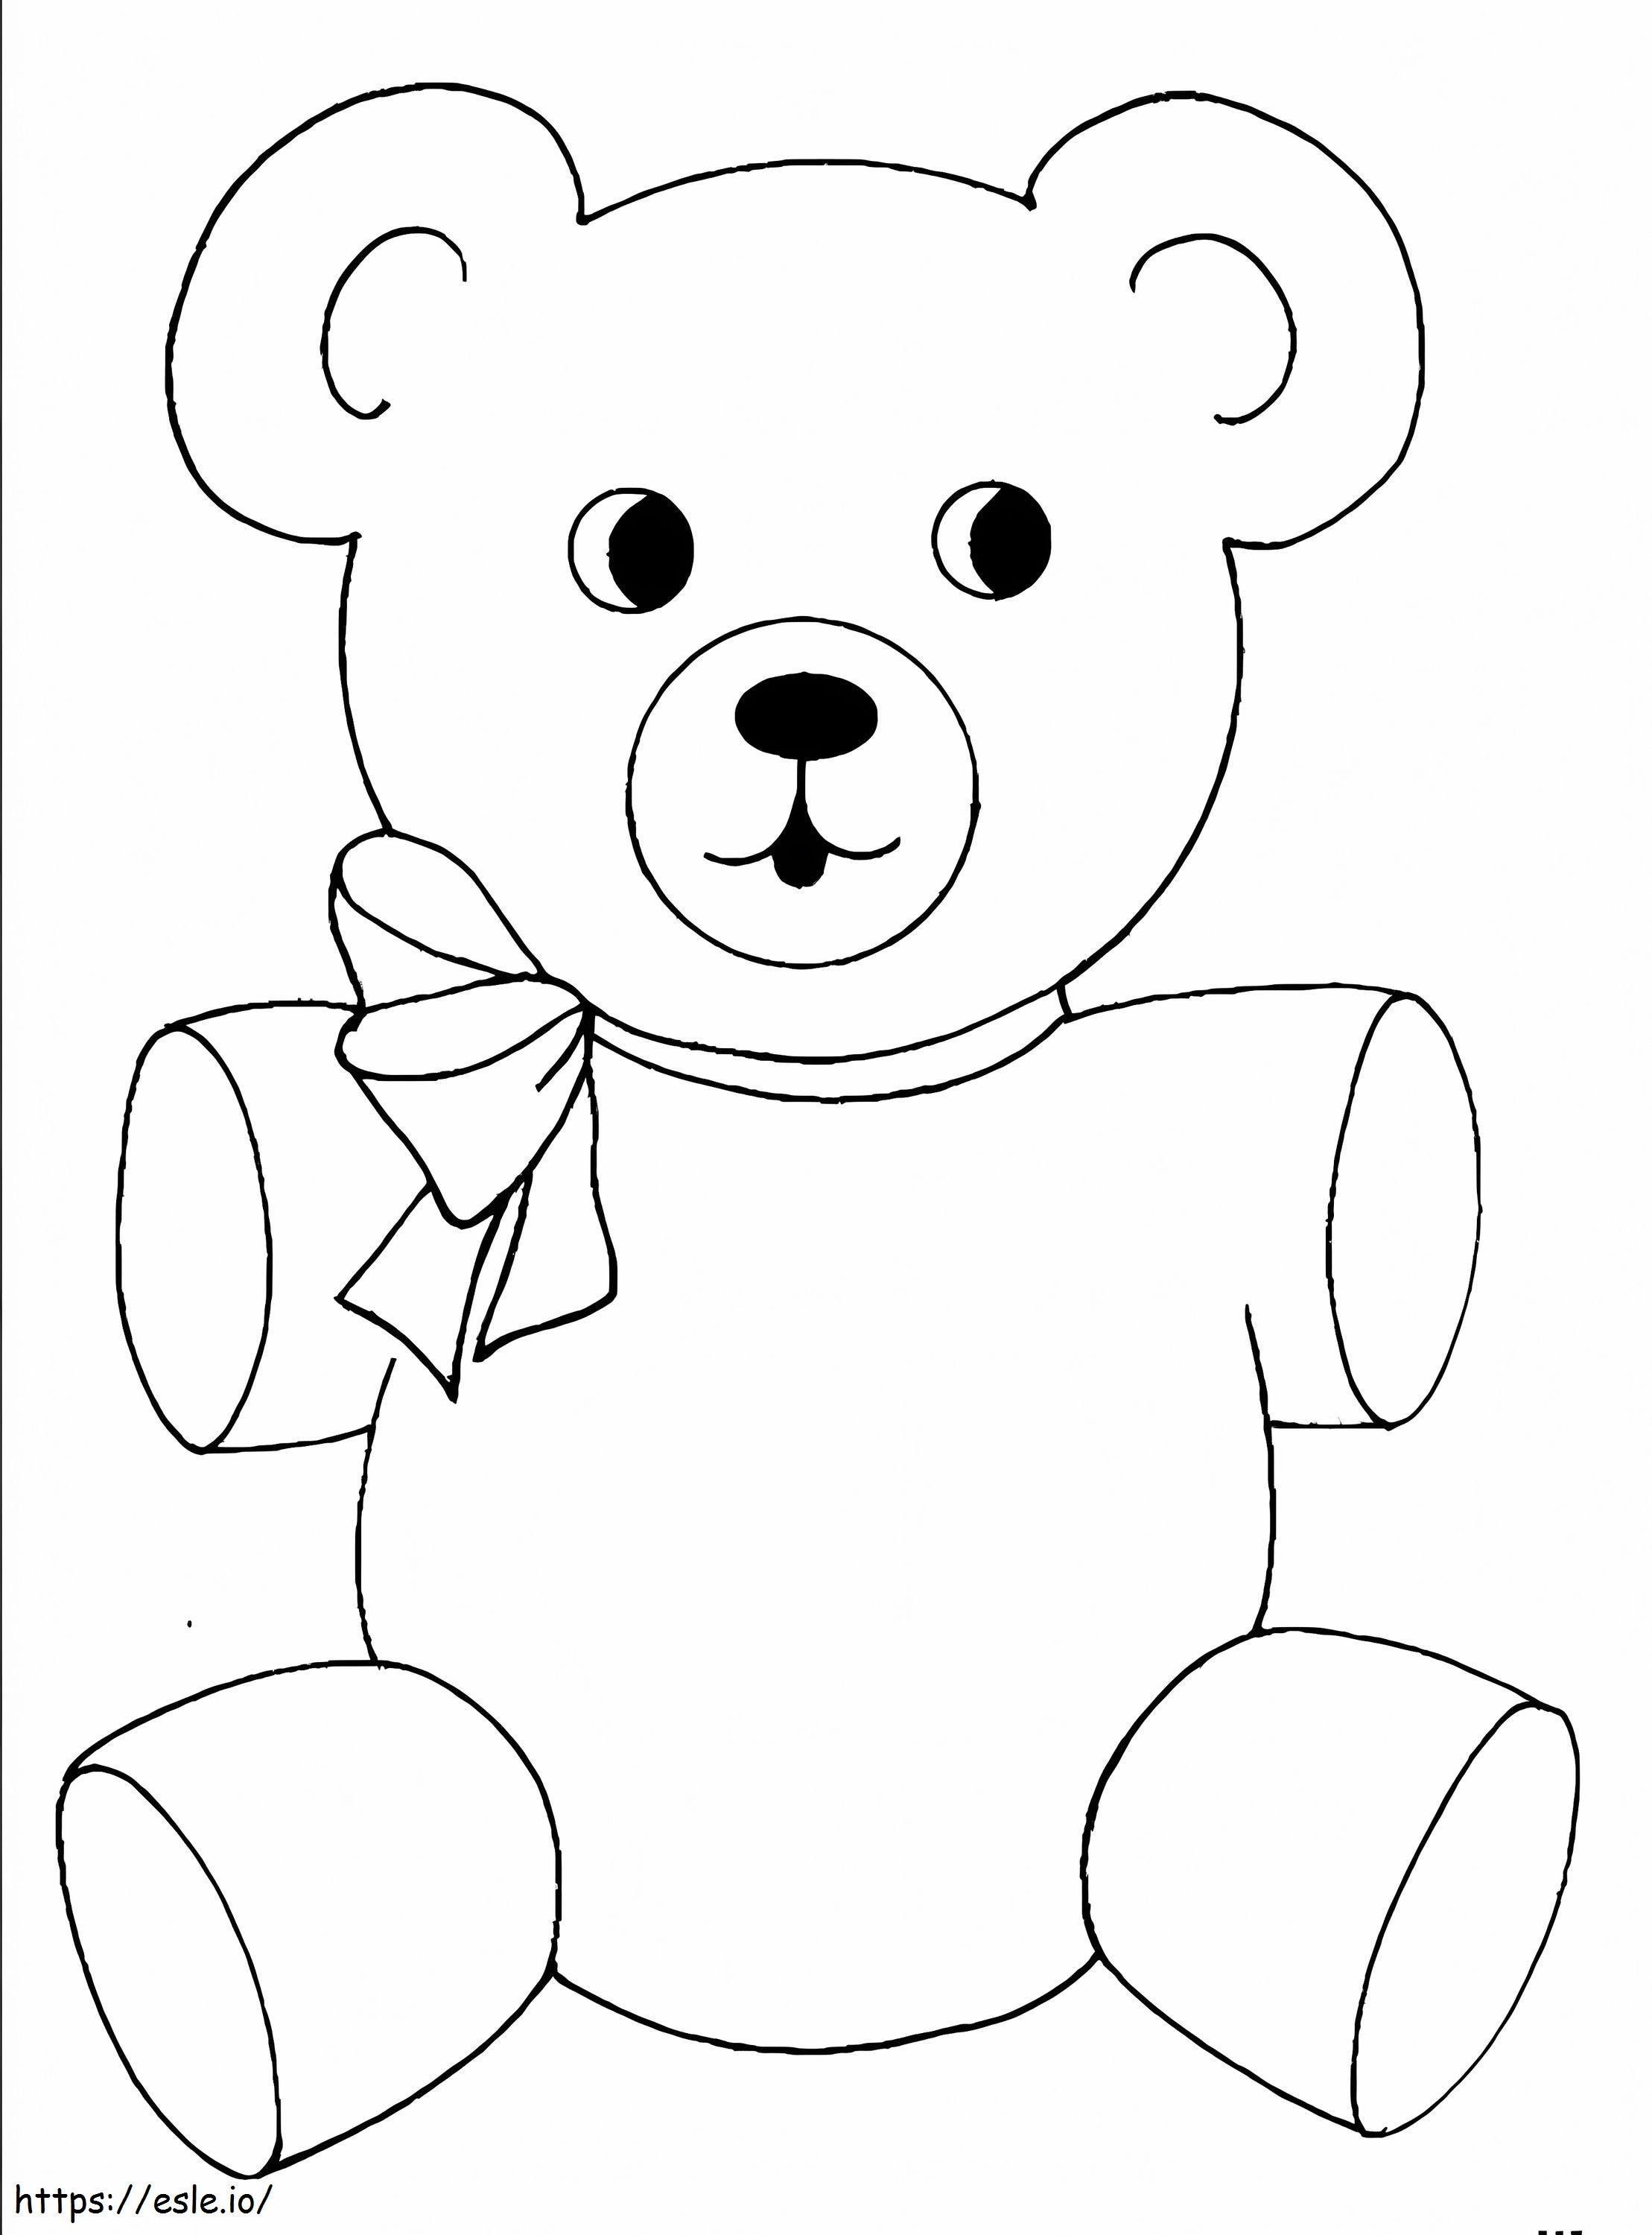 Normal Teddy Bear coloring page